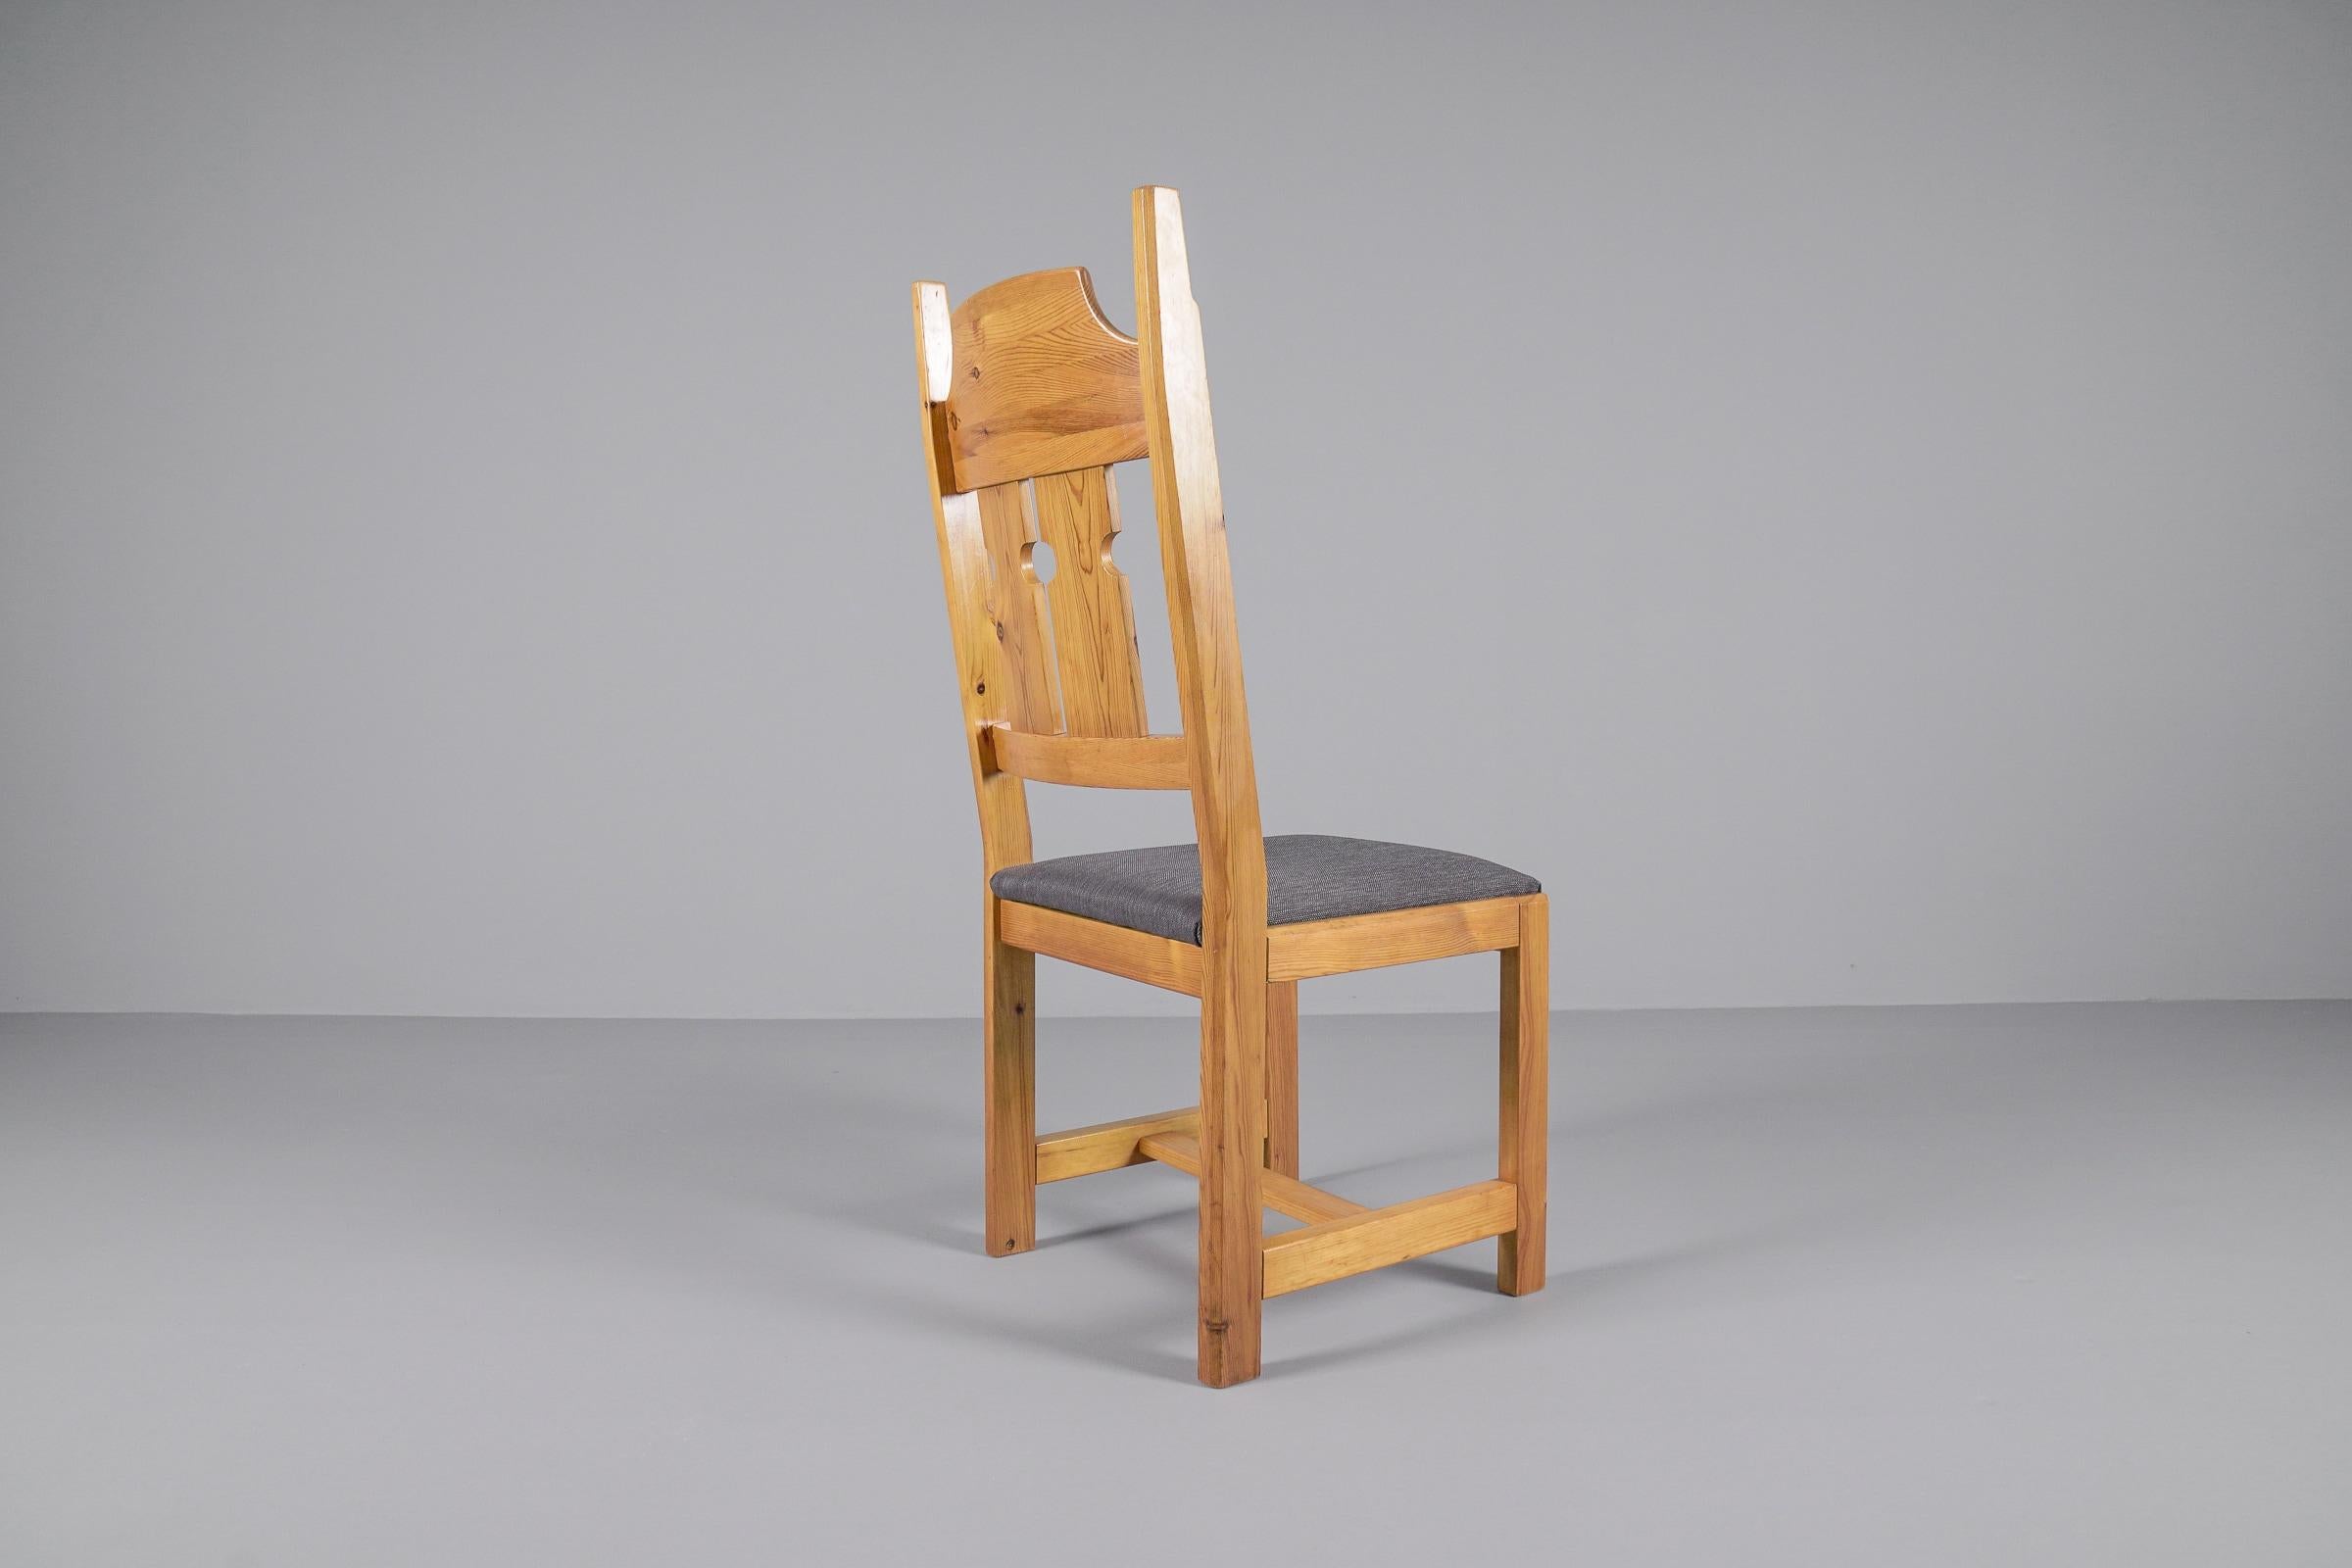  Set of 4 Swedish Pine Chairs by Gilbert Marklund for Furusnickarn AB, 1970s For Sale 9